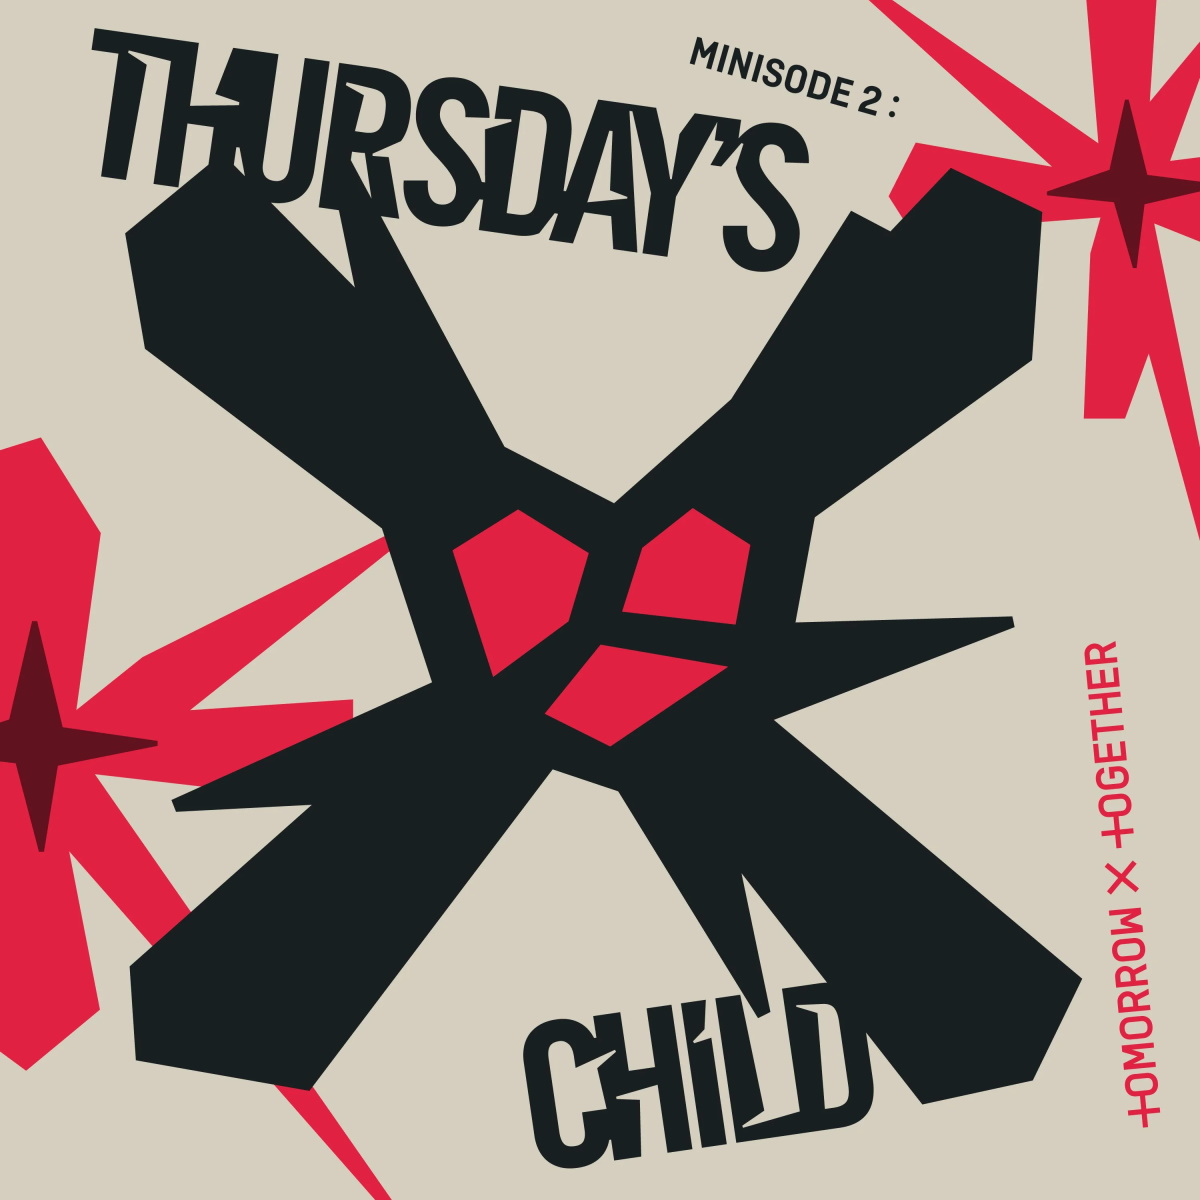 Cover art for『TOMORROW X TOGETHER - Trust Fund Baby』from the release『minisode 2: Thursday’s Child